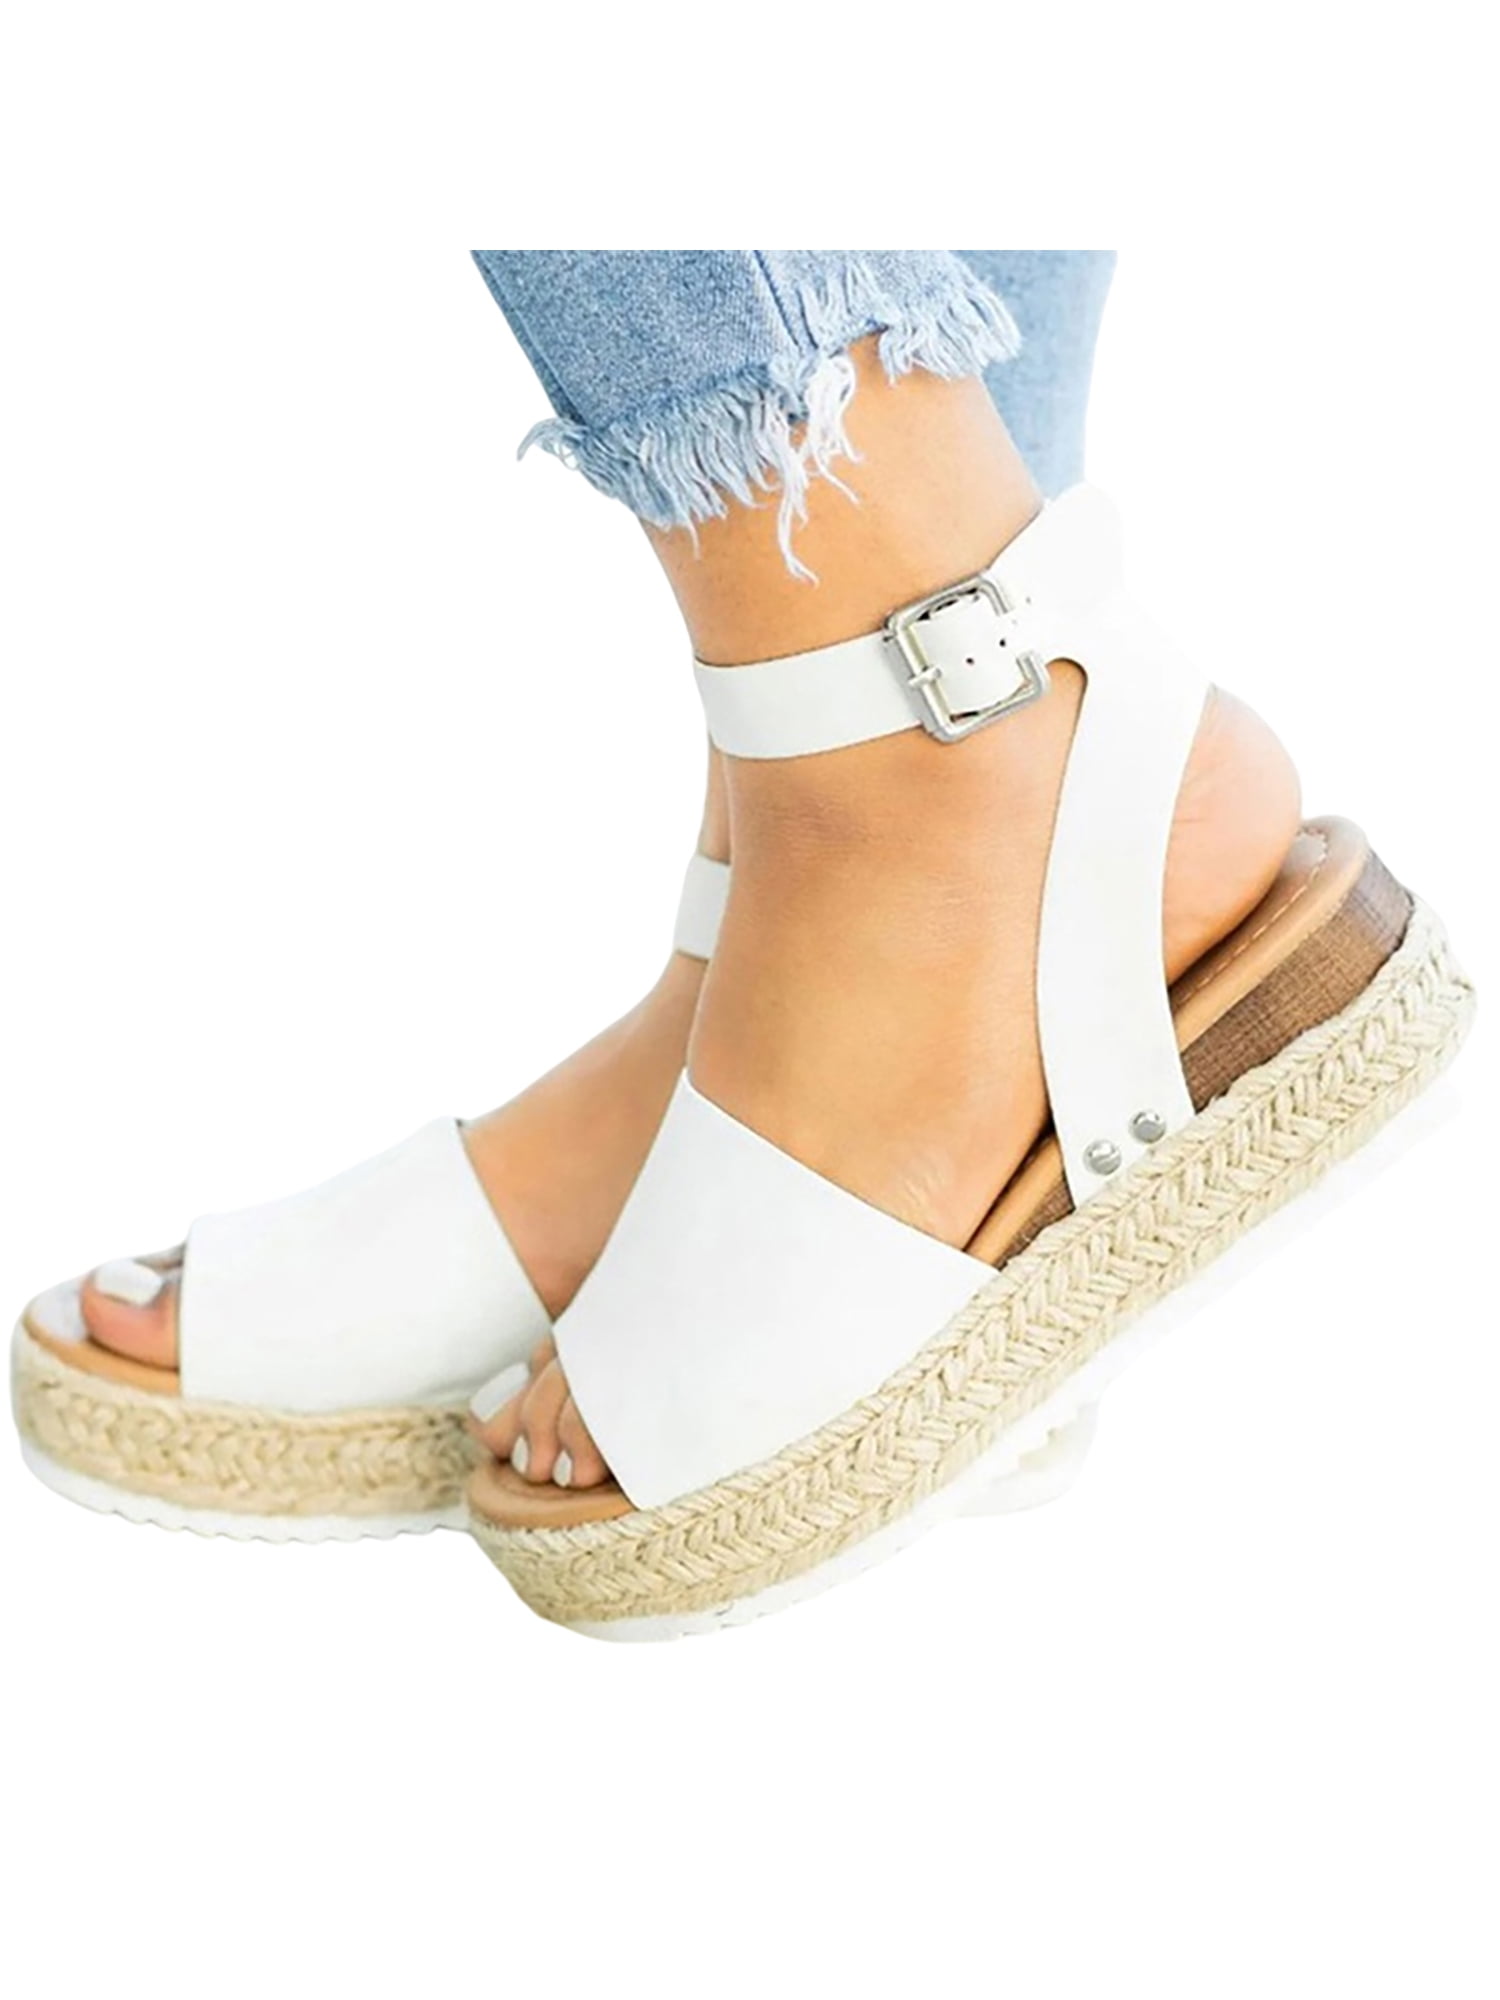 Details about   Women's Breathable Wedge Heel Espadrilles Summer Ankle Strap Sandals Casual Chic 